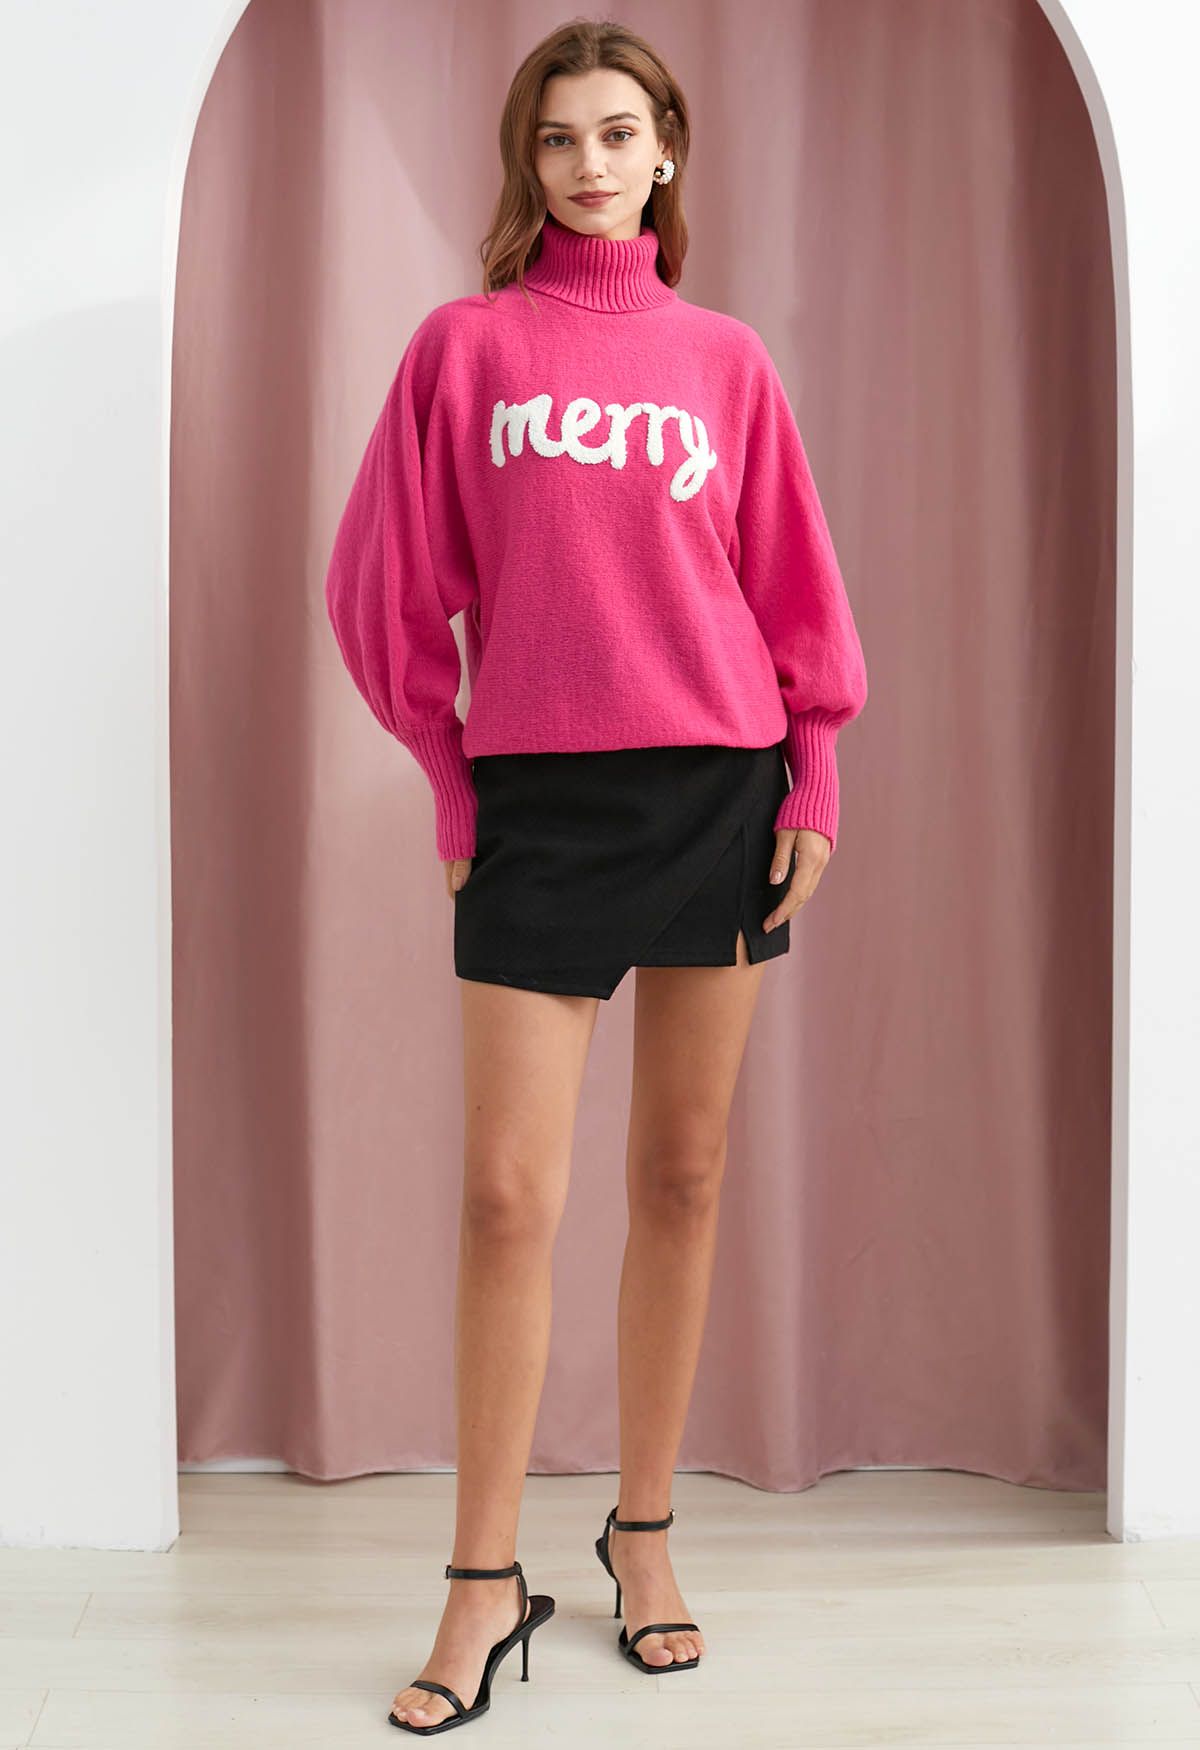 Merry Turtleneck Batwing Sleeve Knit Sweater in Hot Pink